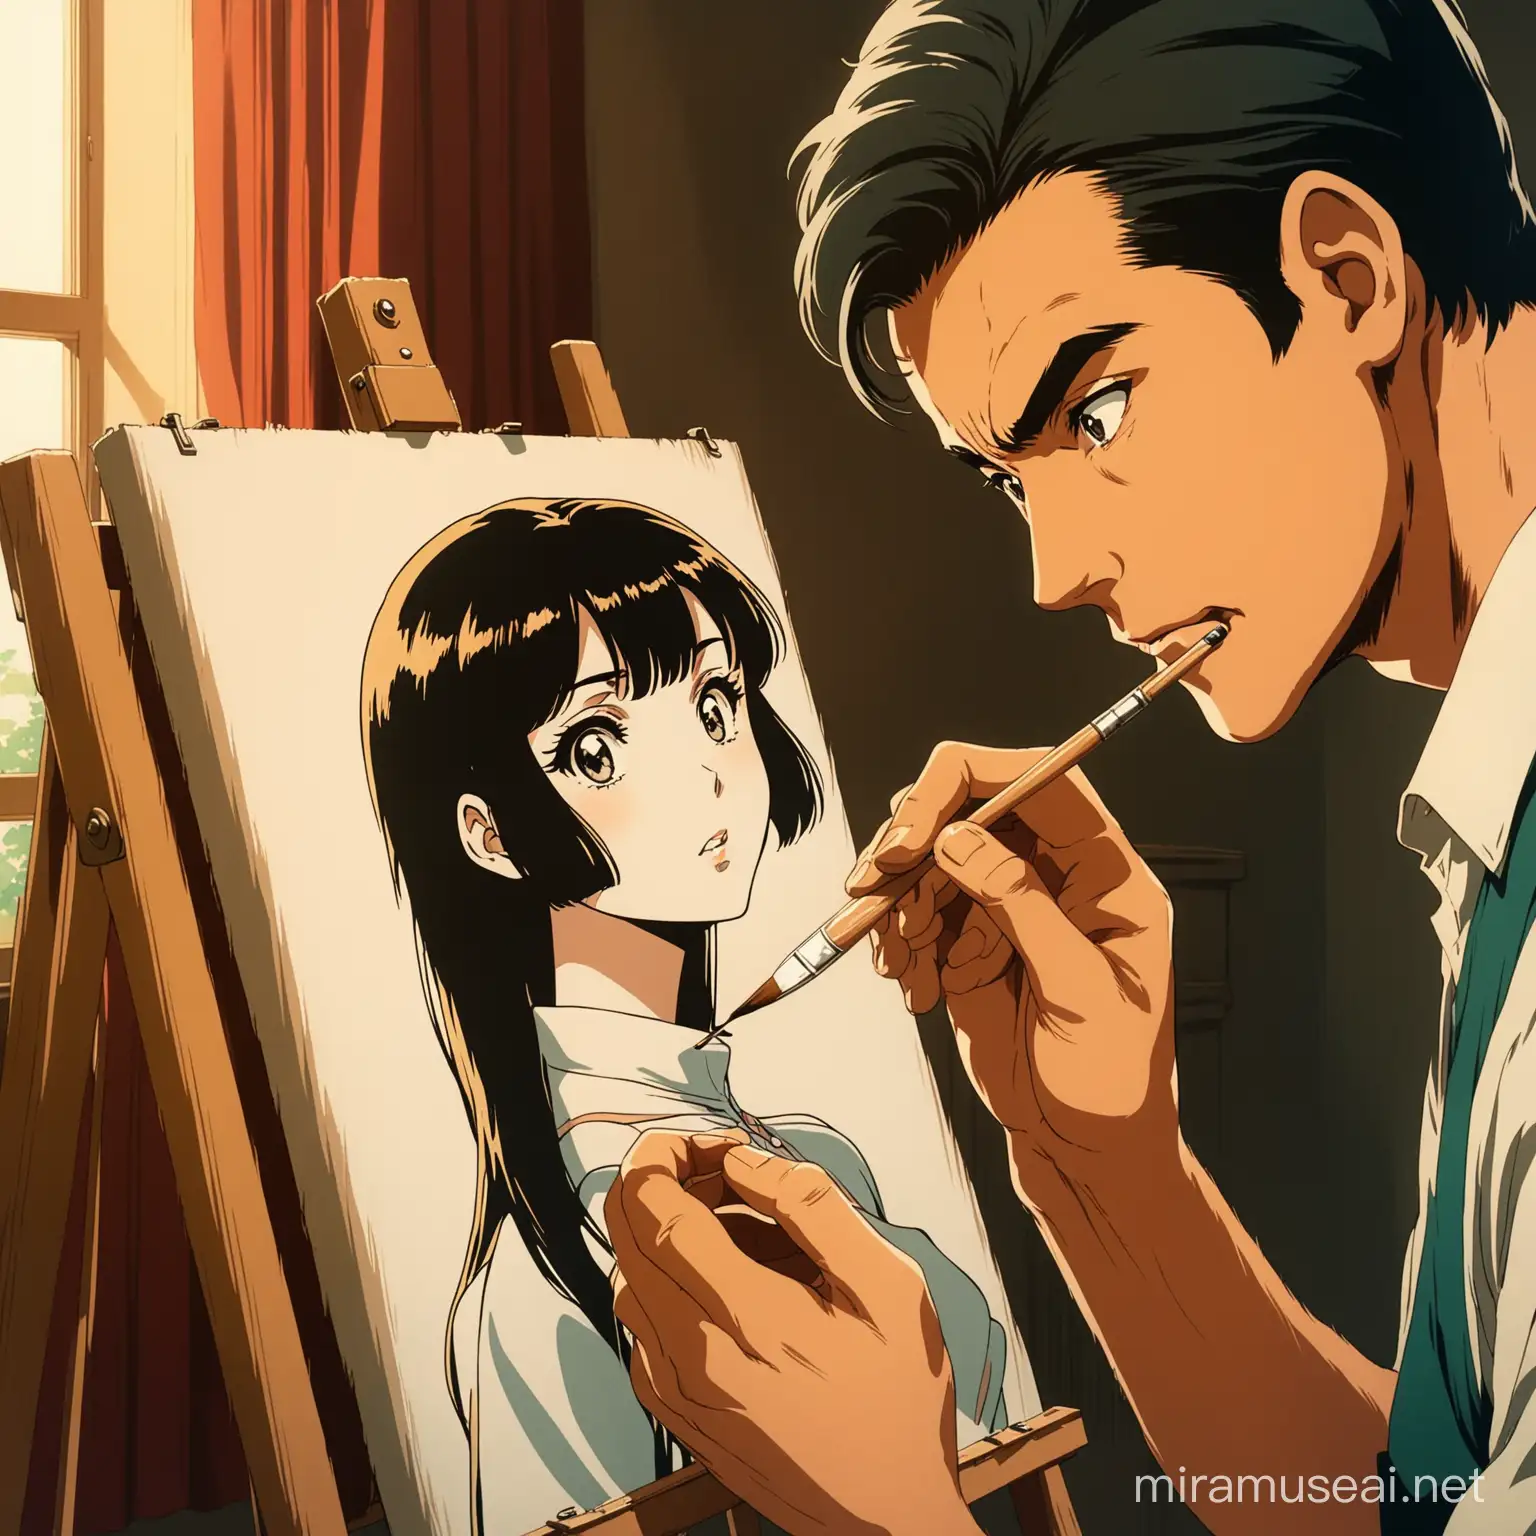 Vintage Anime Style Man Painting a Horrible Portrait of a Young Woman